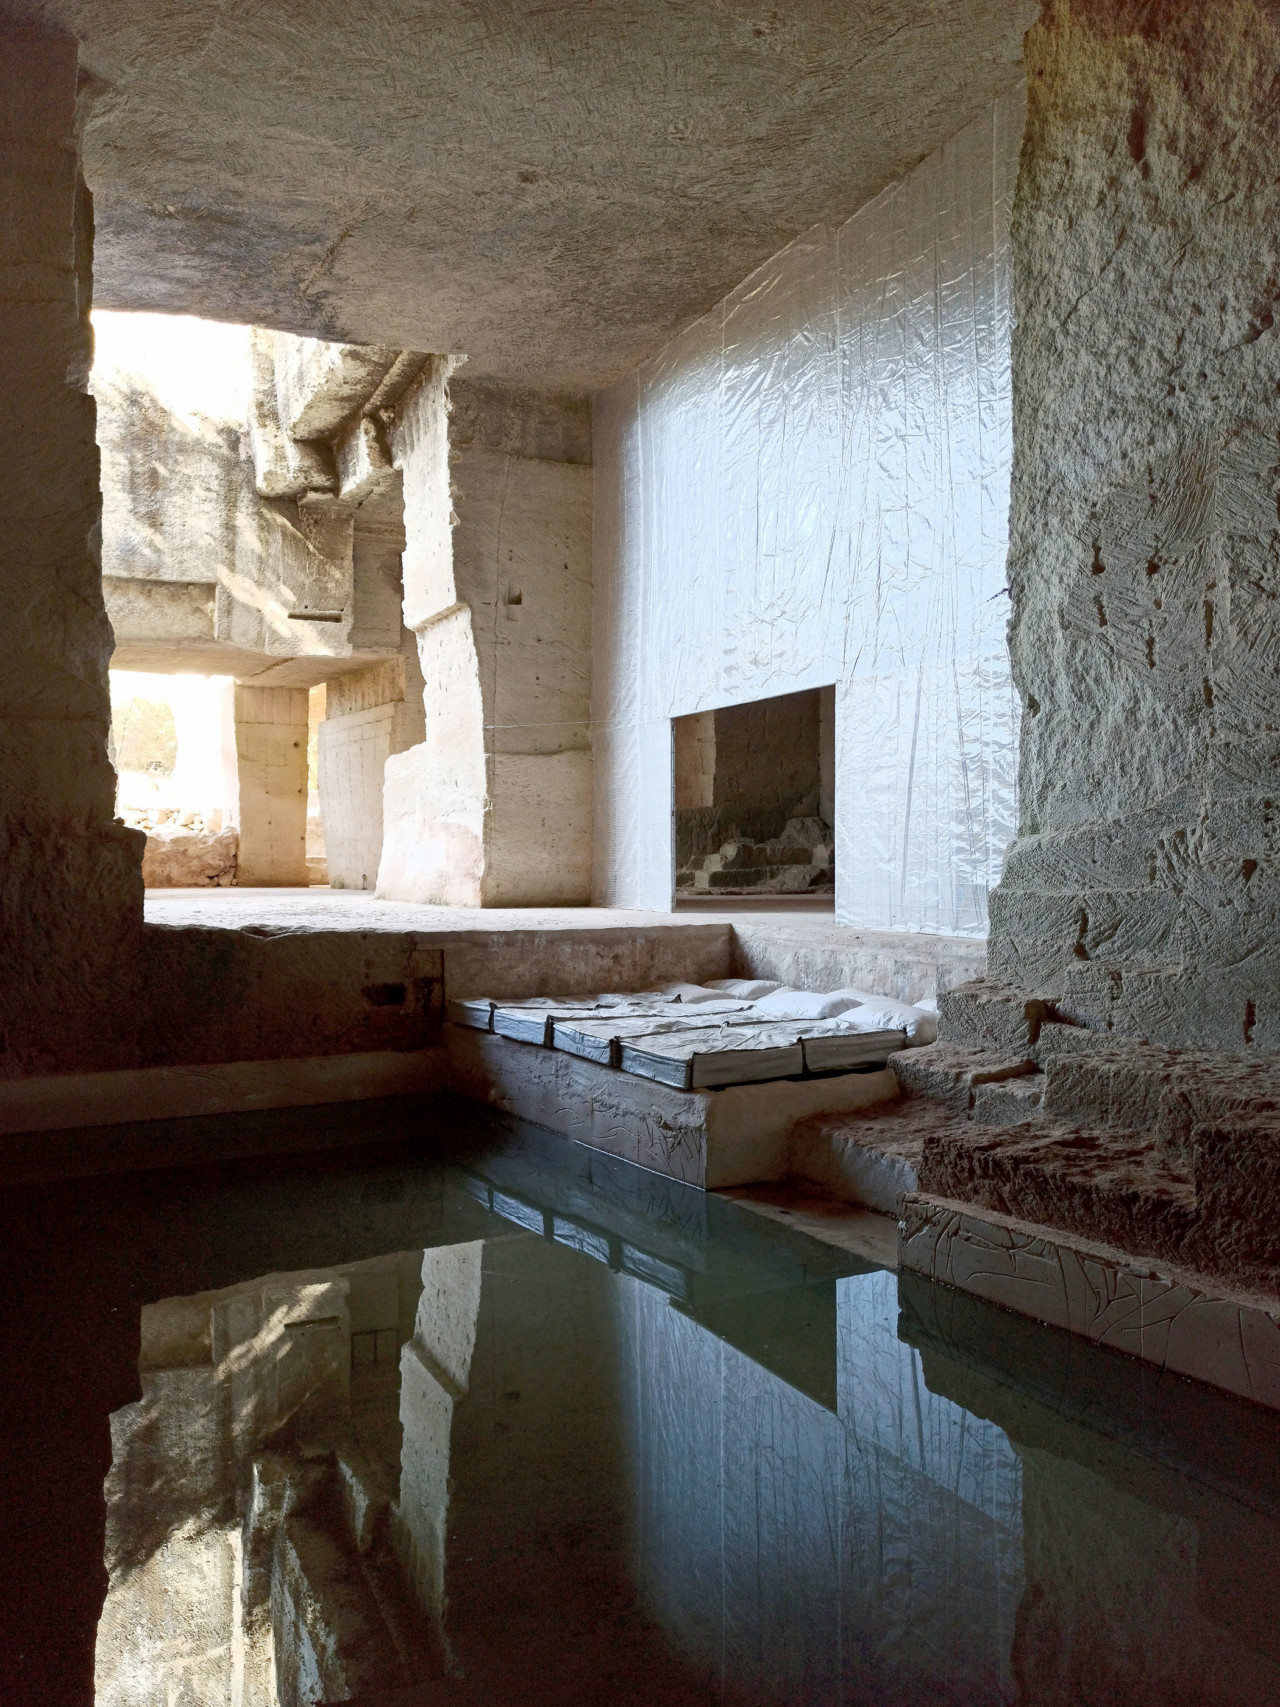 Pool in a sandstone quarry